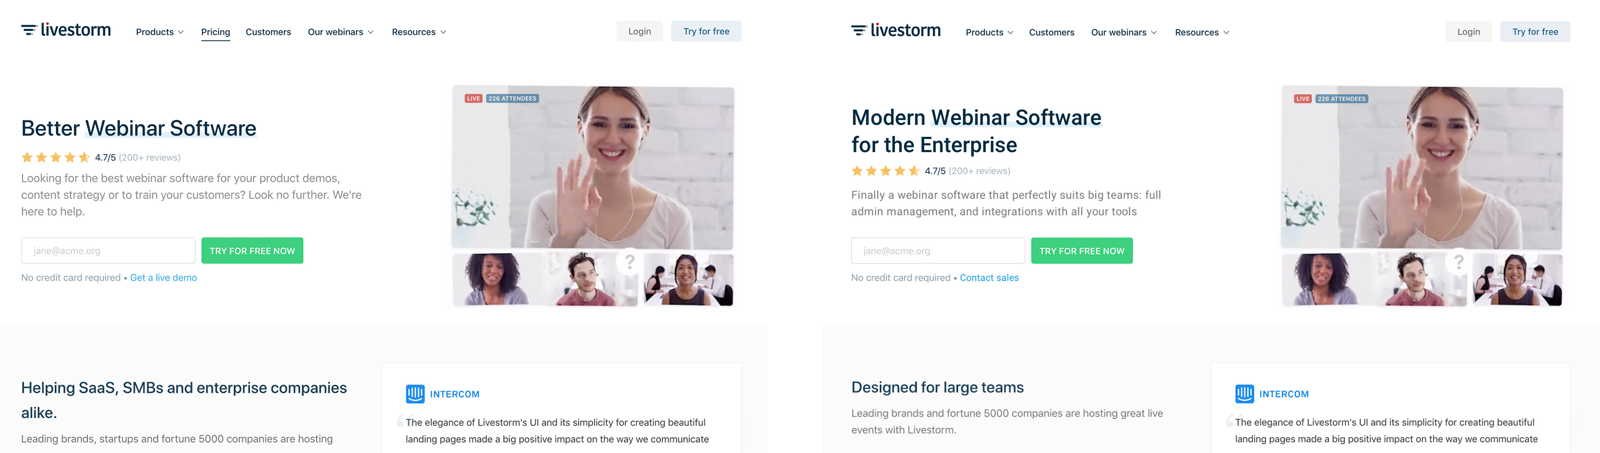 Livestorm's site customized by visitor company size